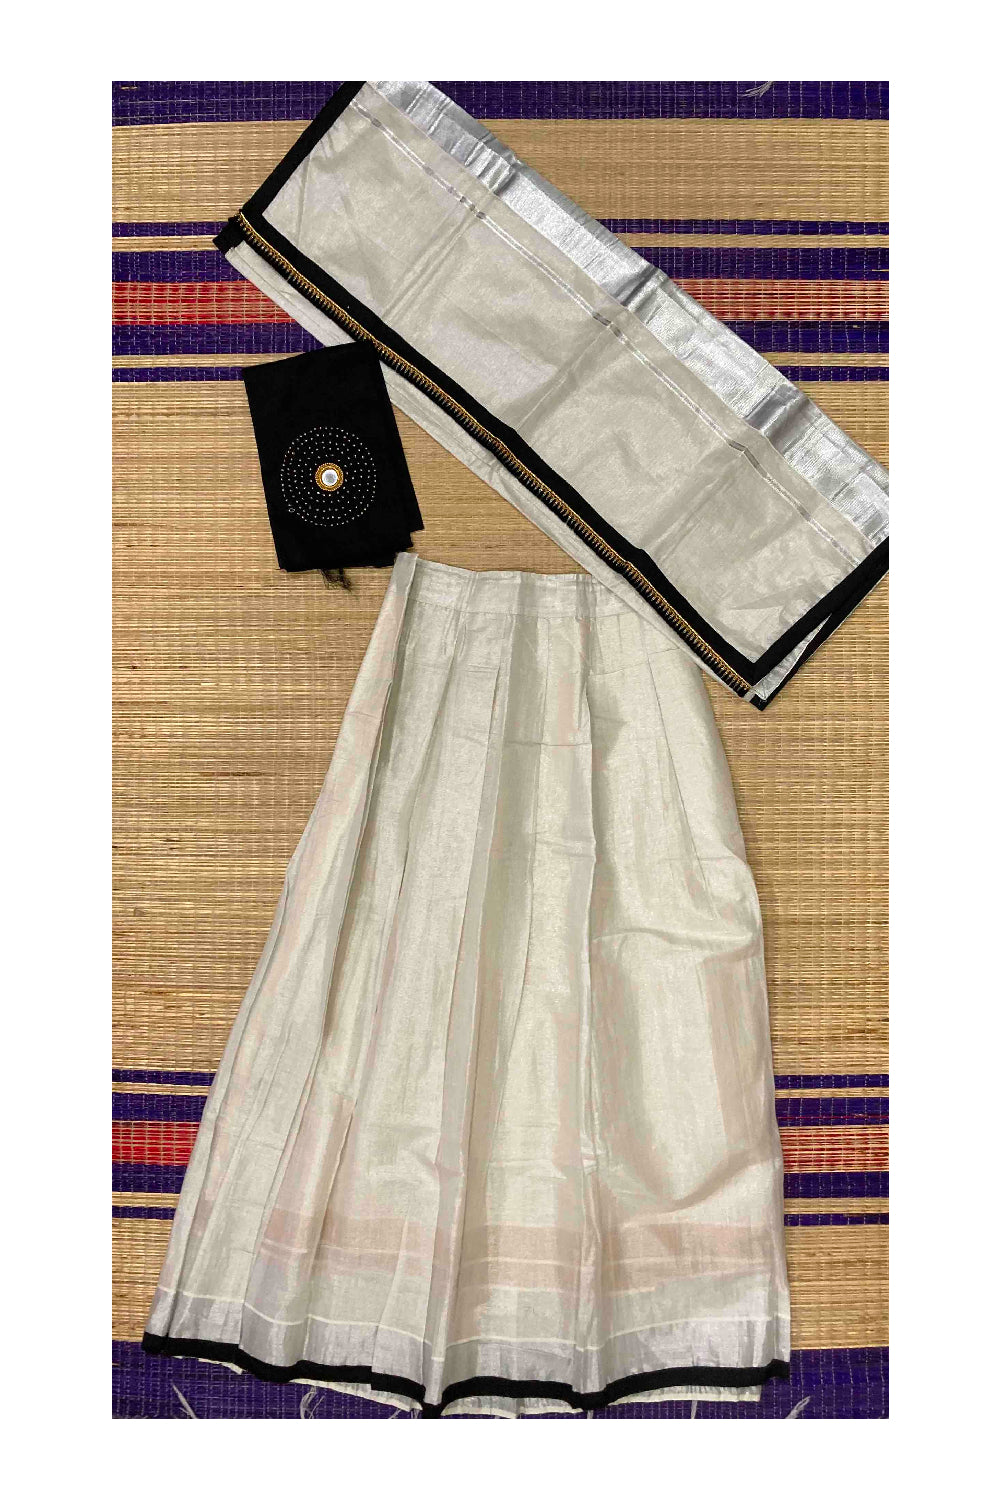 Kerala Silver Tissue Semi Stitched Dhavani Set with Blouse Piece and Neriyathu with Black Border Bead Works